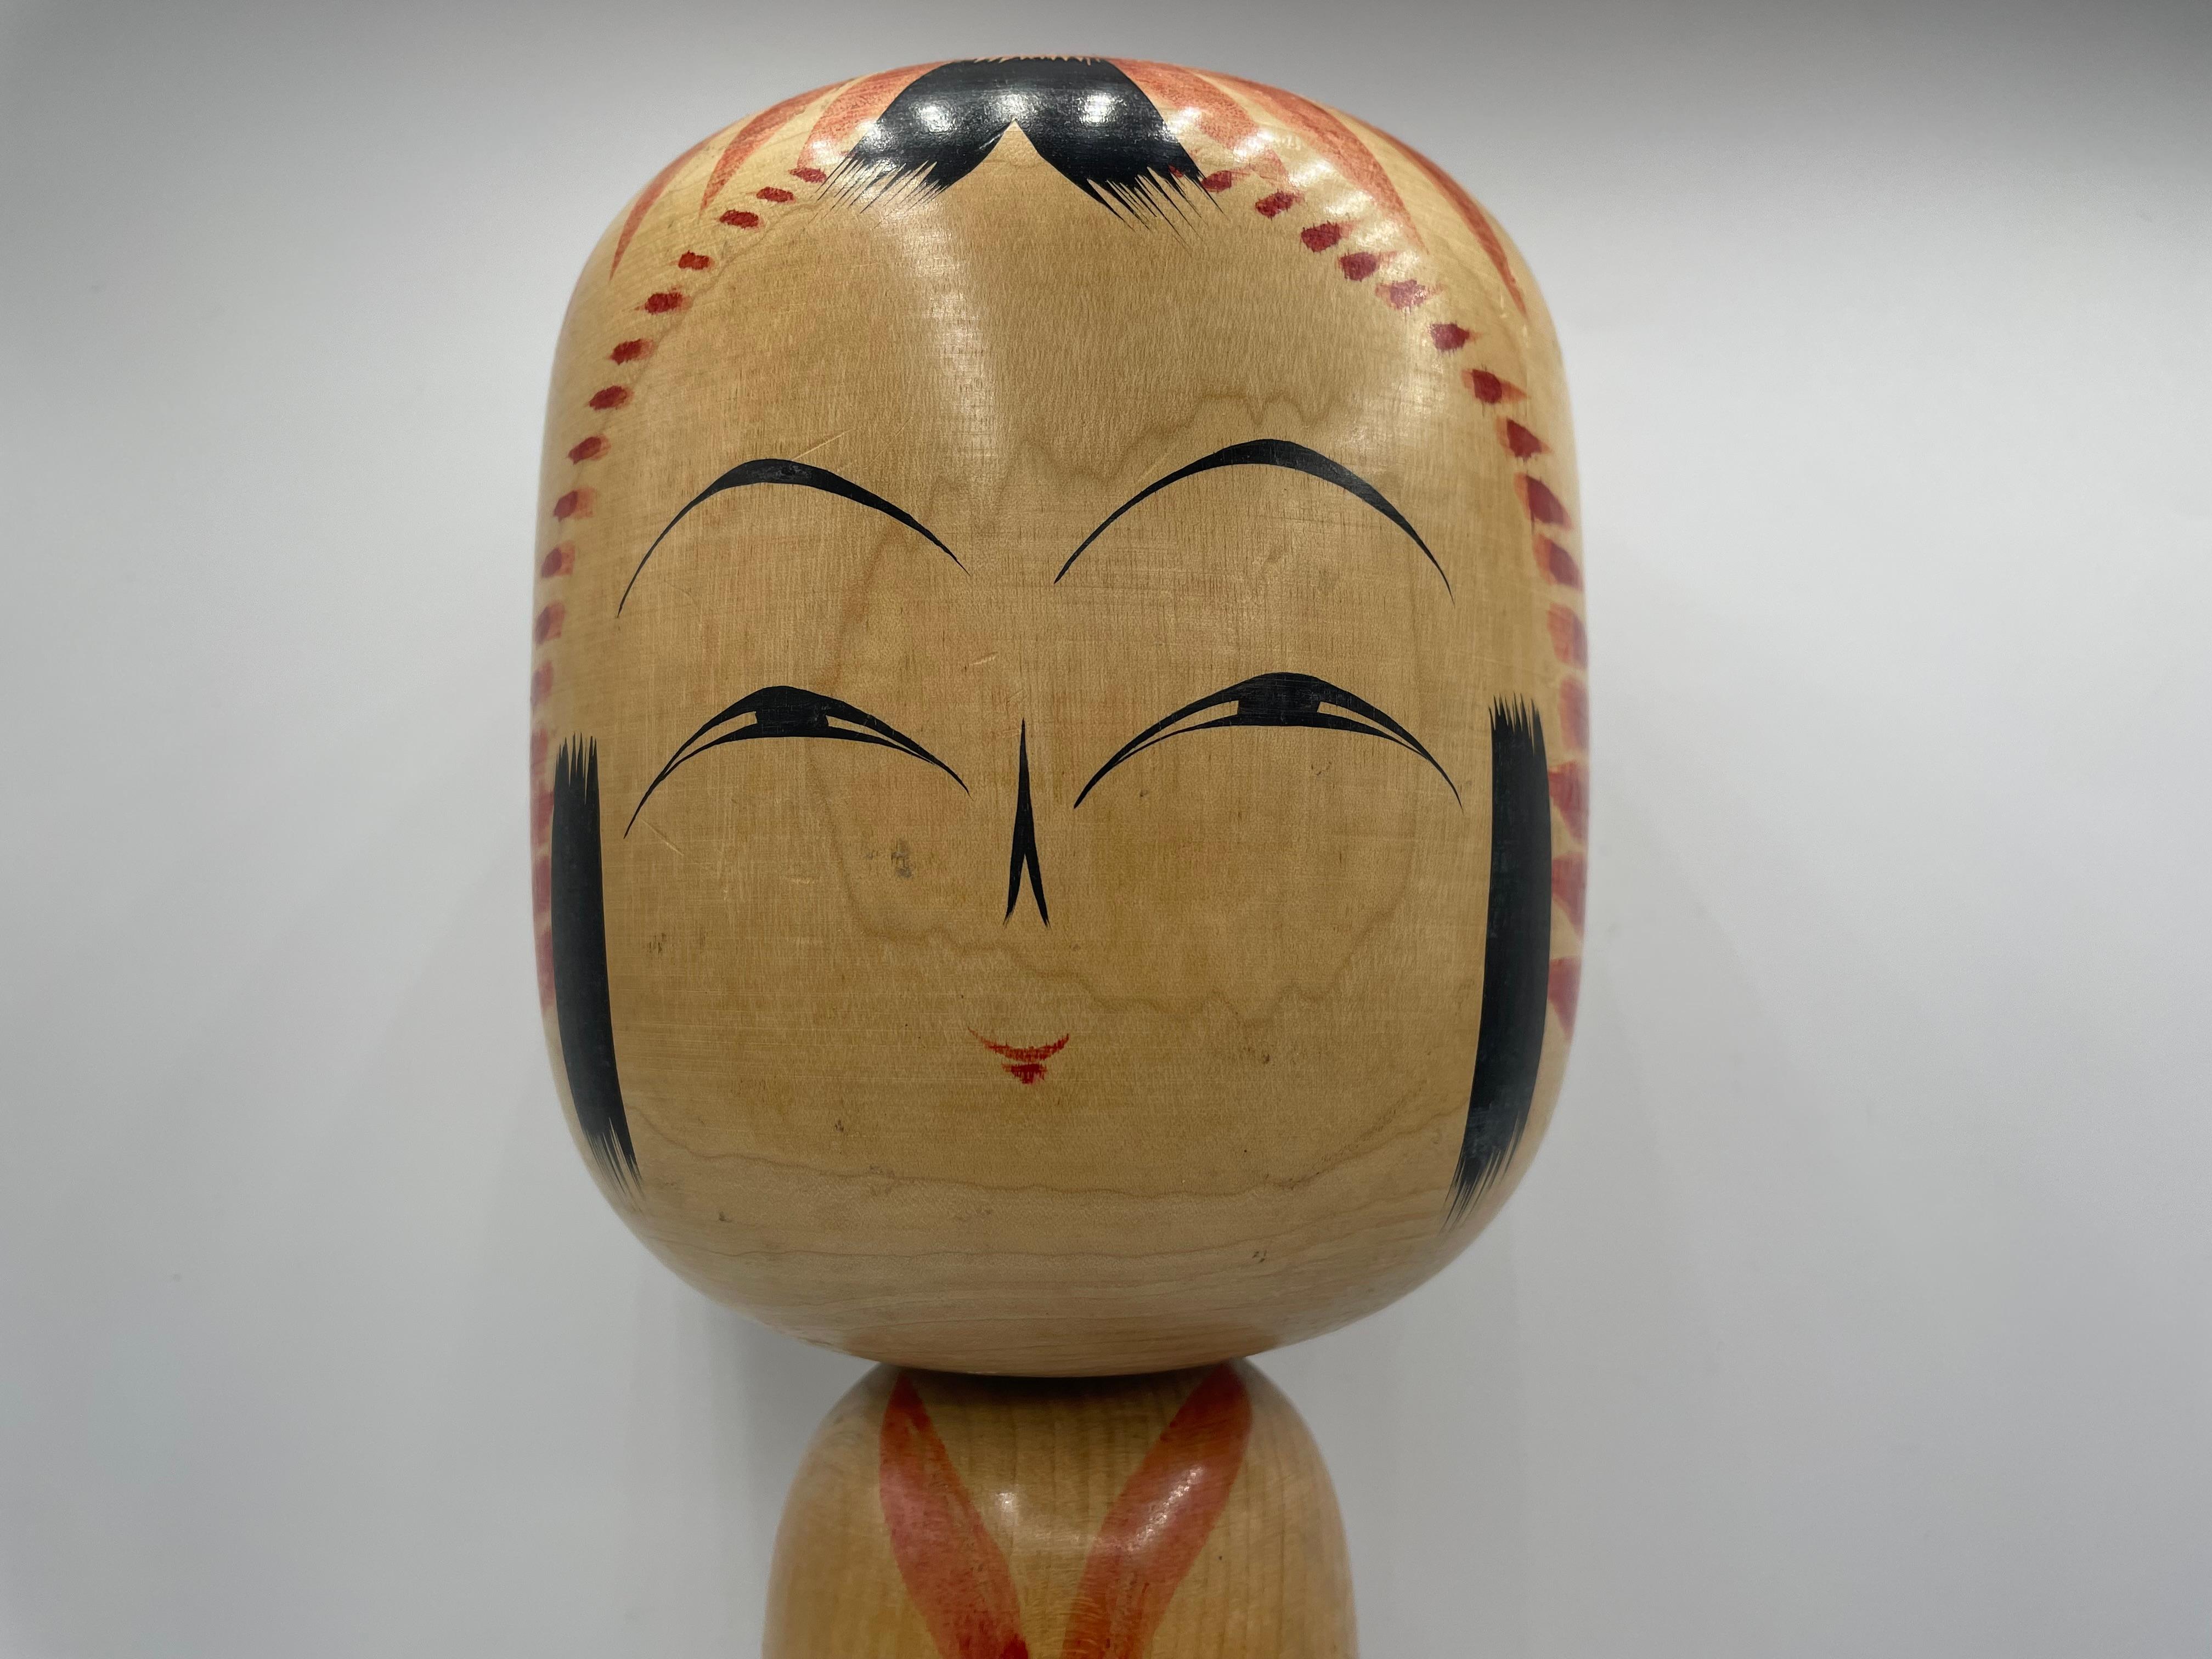 This is a wooden doll which is called Kokeshi in Japanese.
This kokeshi was made in Japan around 1970s by kokeshi artist Kyuichi OMORI.
He was born in 30th November 1932. His signature is written on the bottom of this kokeshi doll.
This kokeshi was